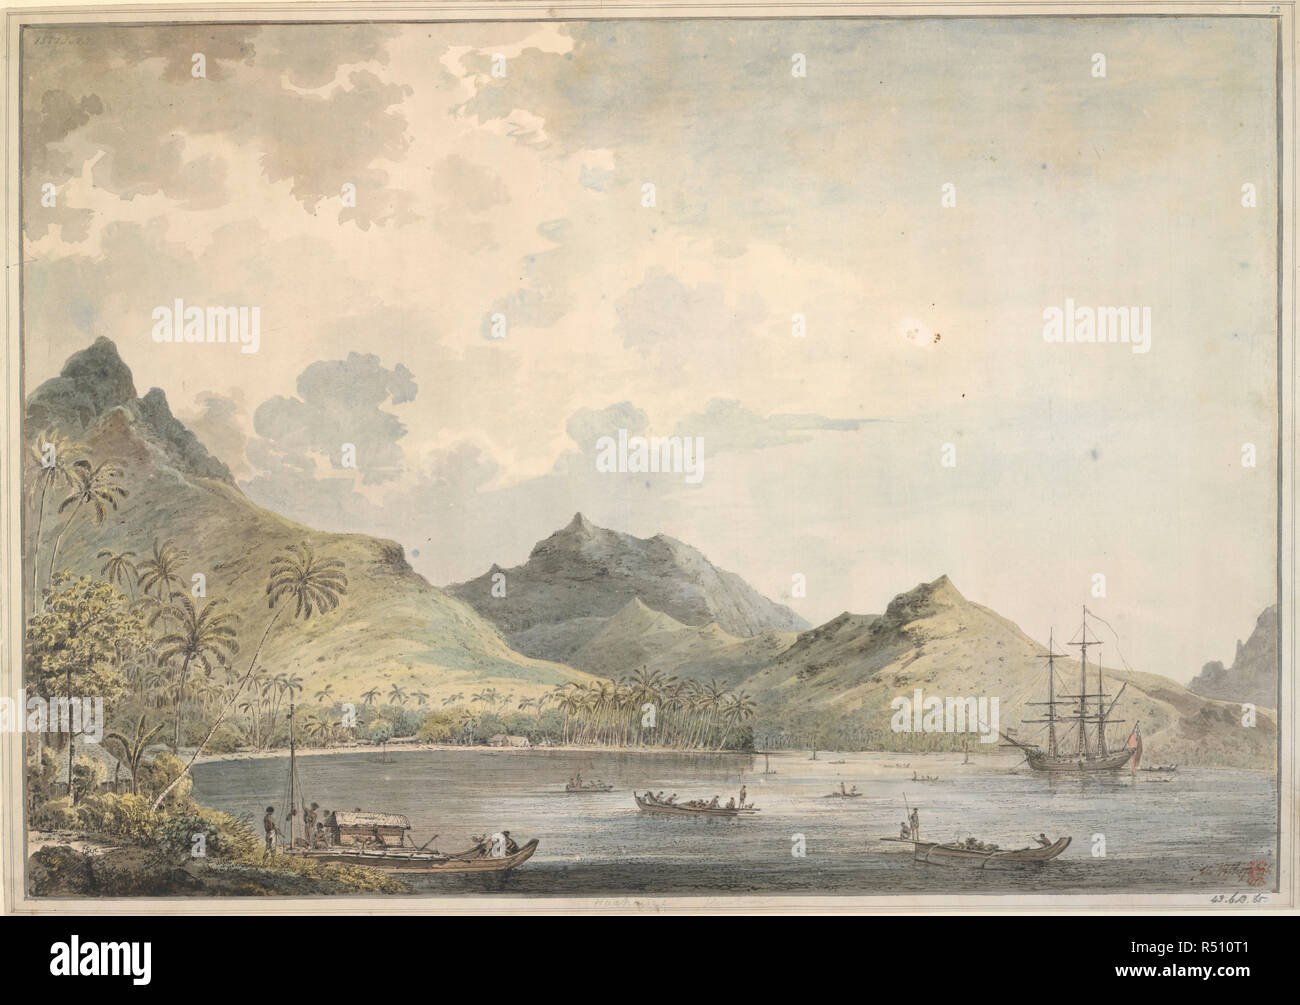 A View of Fare Harbour, Huahine, [Whole drawing]. A view of the harbour of Huahine [Fare Harbour]. with peaked mountains, including Mount Turi, in the background. In the bay is the 'Resolution' and many native craft, and on the shore a group of natives tend a double canoe with a deck-house. In the background and along the shore are native huts and English tents. The view gives the location of Omai's settlement. Captain Cook had agreed with the chiefs for a place for Omai to settle. Carpenters from both ships built a small house for him, and other members of the crew made a garden, including pl Stock Photo